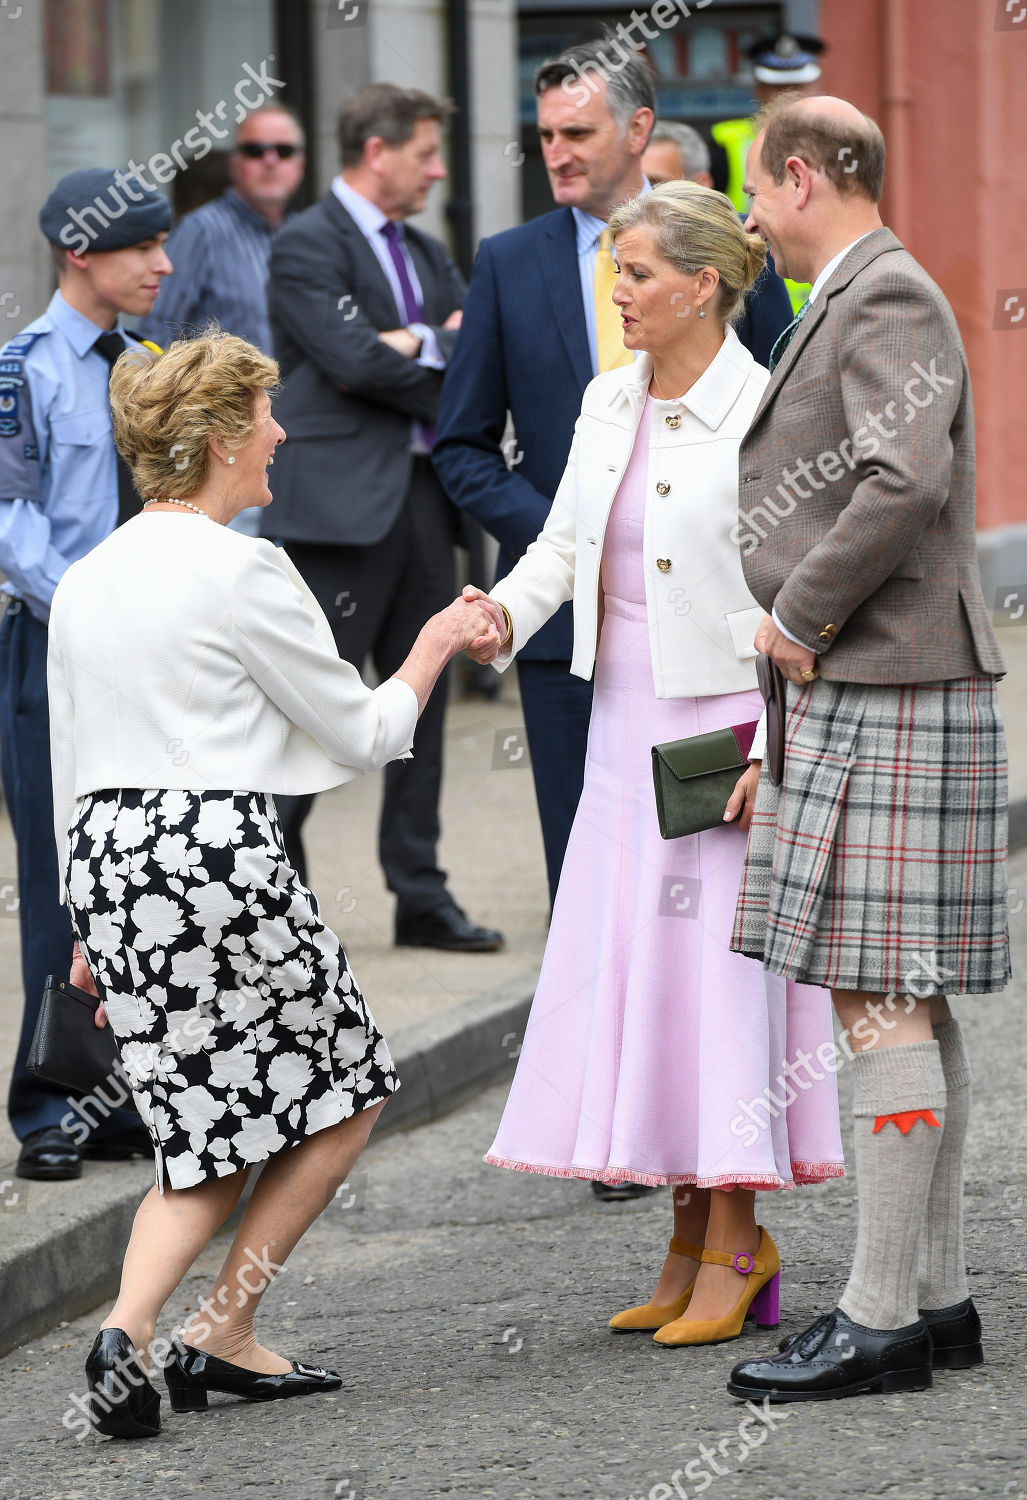 sophie-countess-of-wessex-and-prince-edward-visit-to-scotland-uk-shutterstock-editorial-10325445y.jpg